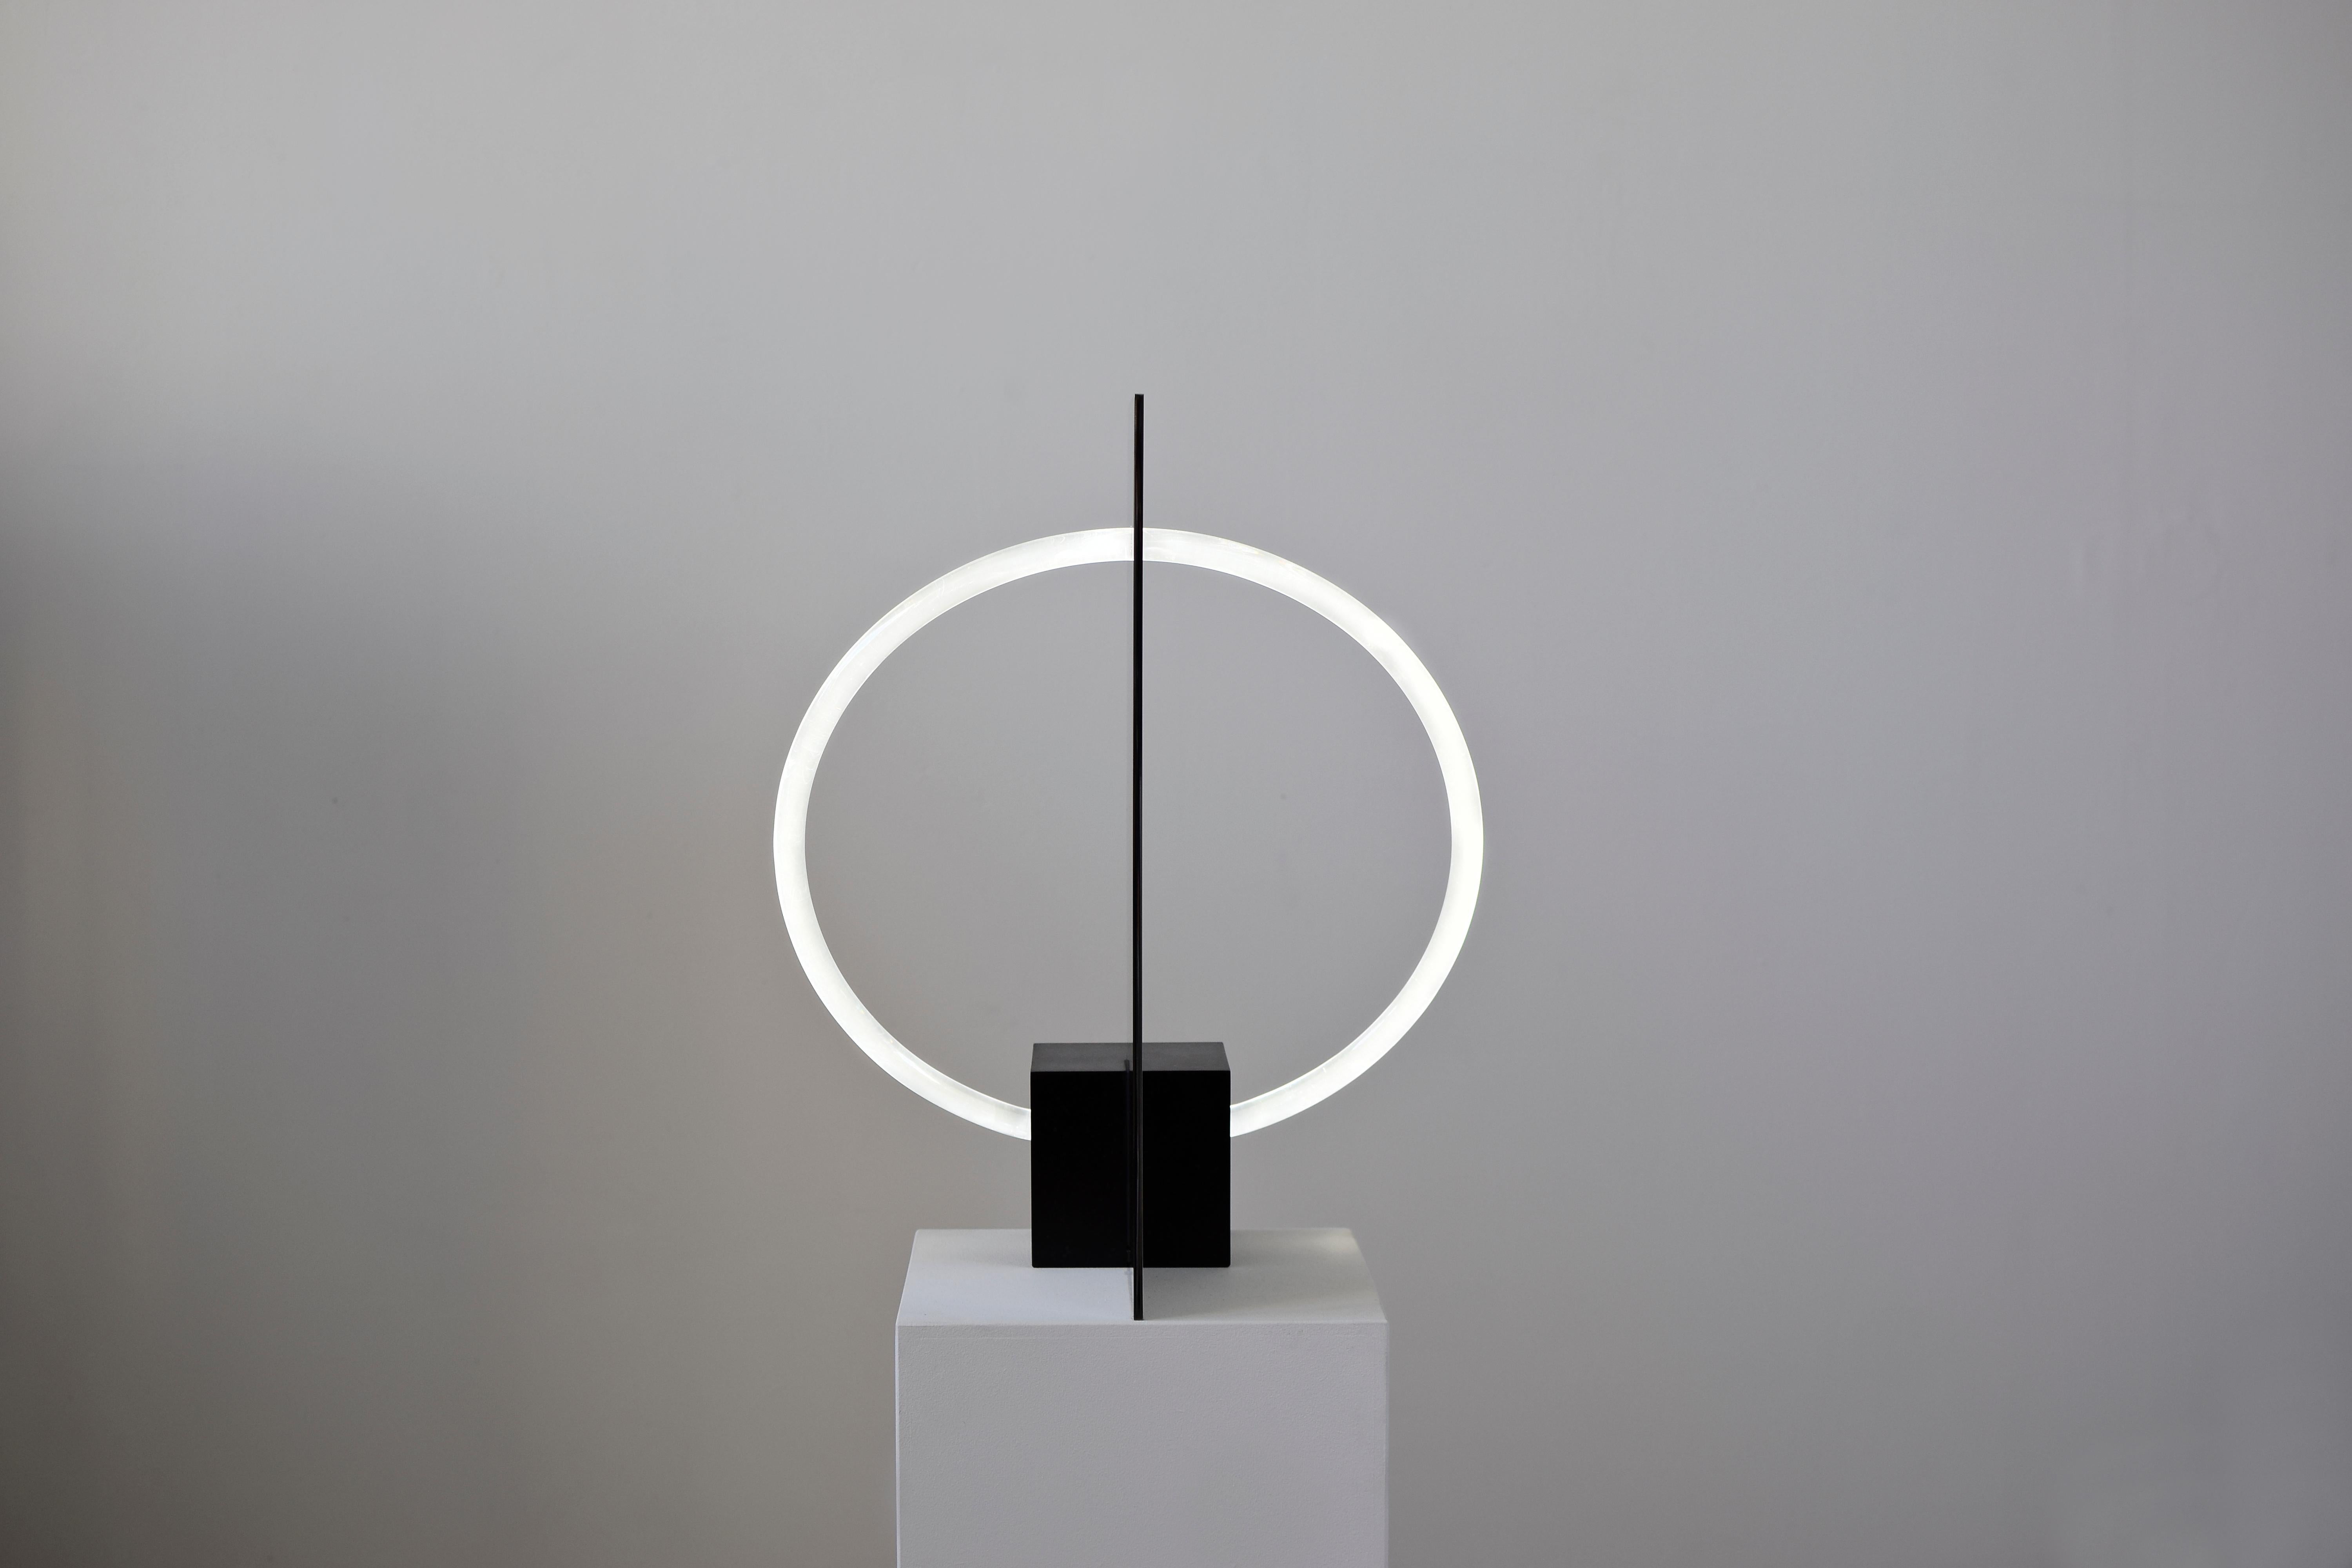 Sculptural lamp with mirror, Maximilian Michaelis

Title: The elusive nature of perception, No. 01

Measures: ca. 46 x 56 x 29 cm

Material: polished stainless steel, Belgian bluestone, acrylic glass, Led

The basis and inspiration for